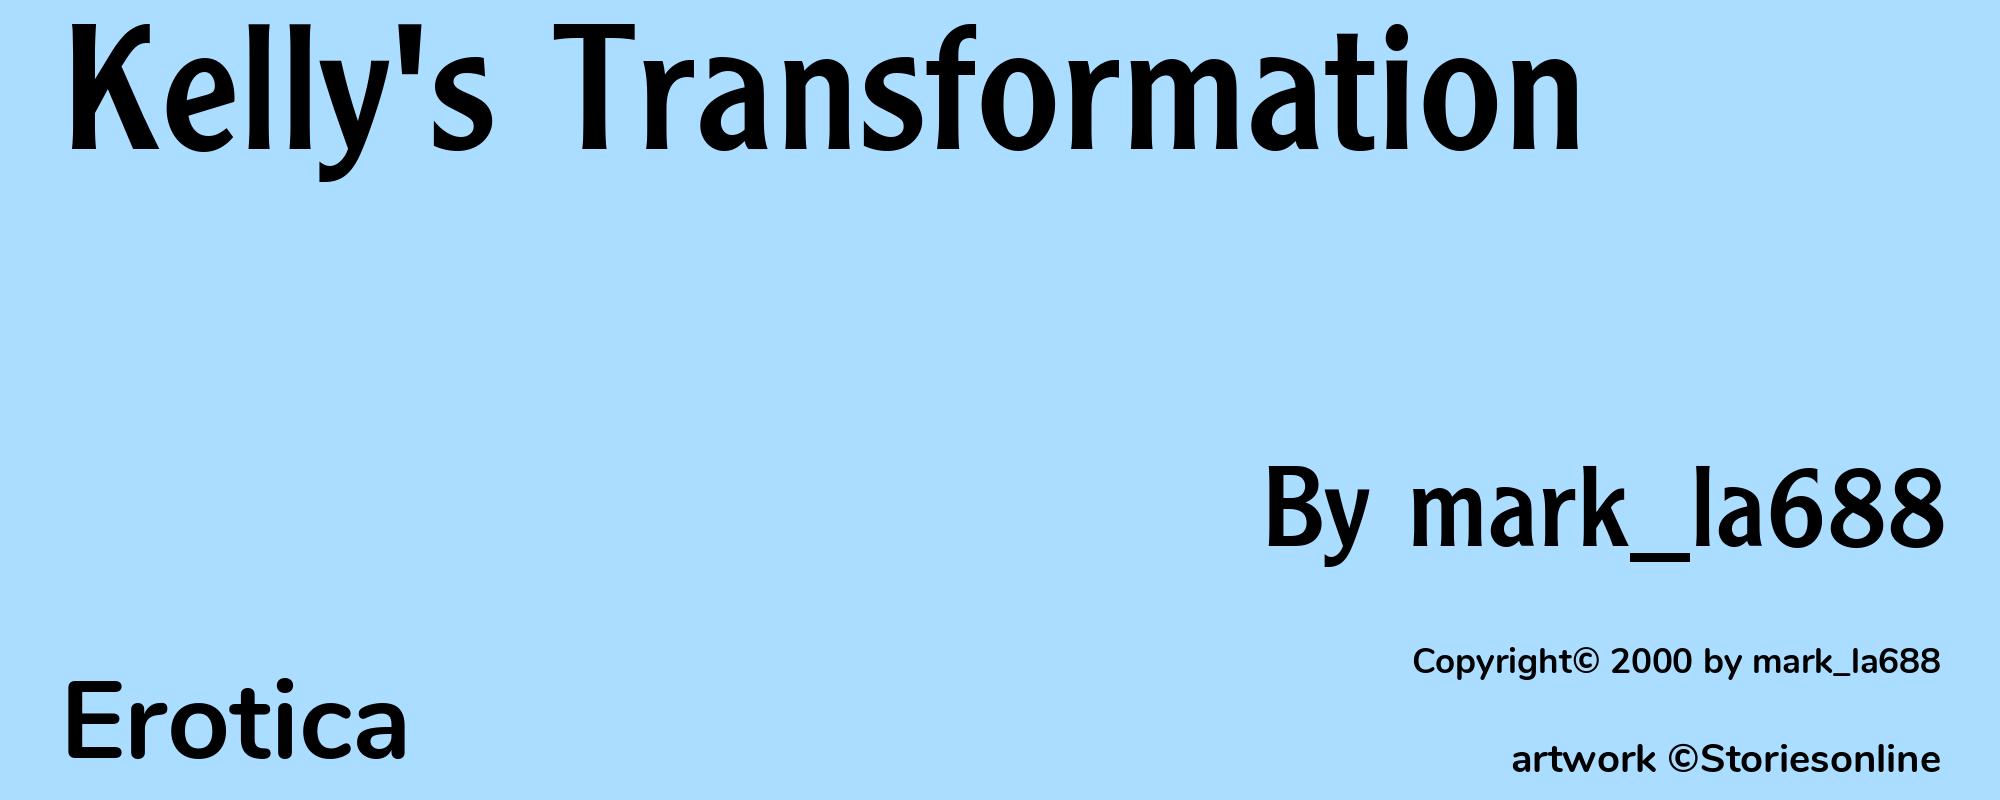 Kelly's Transformation - Cover